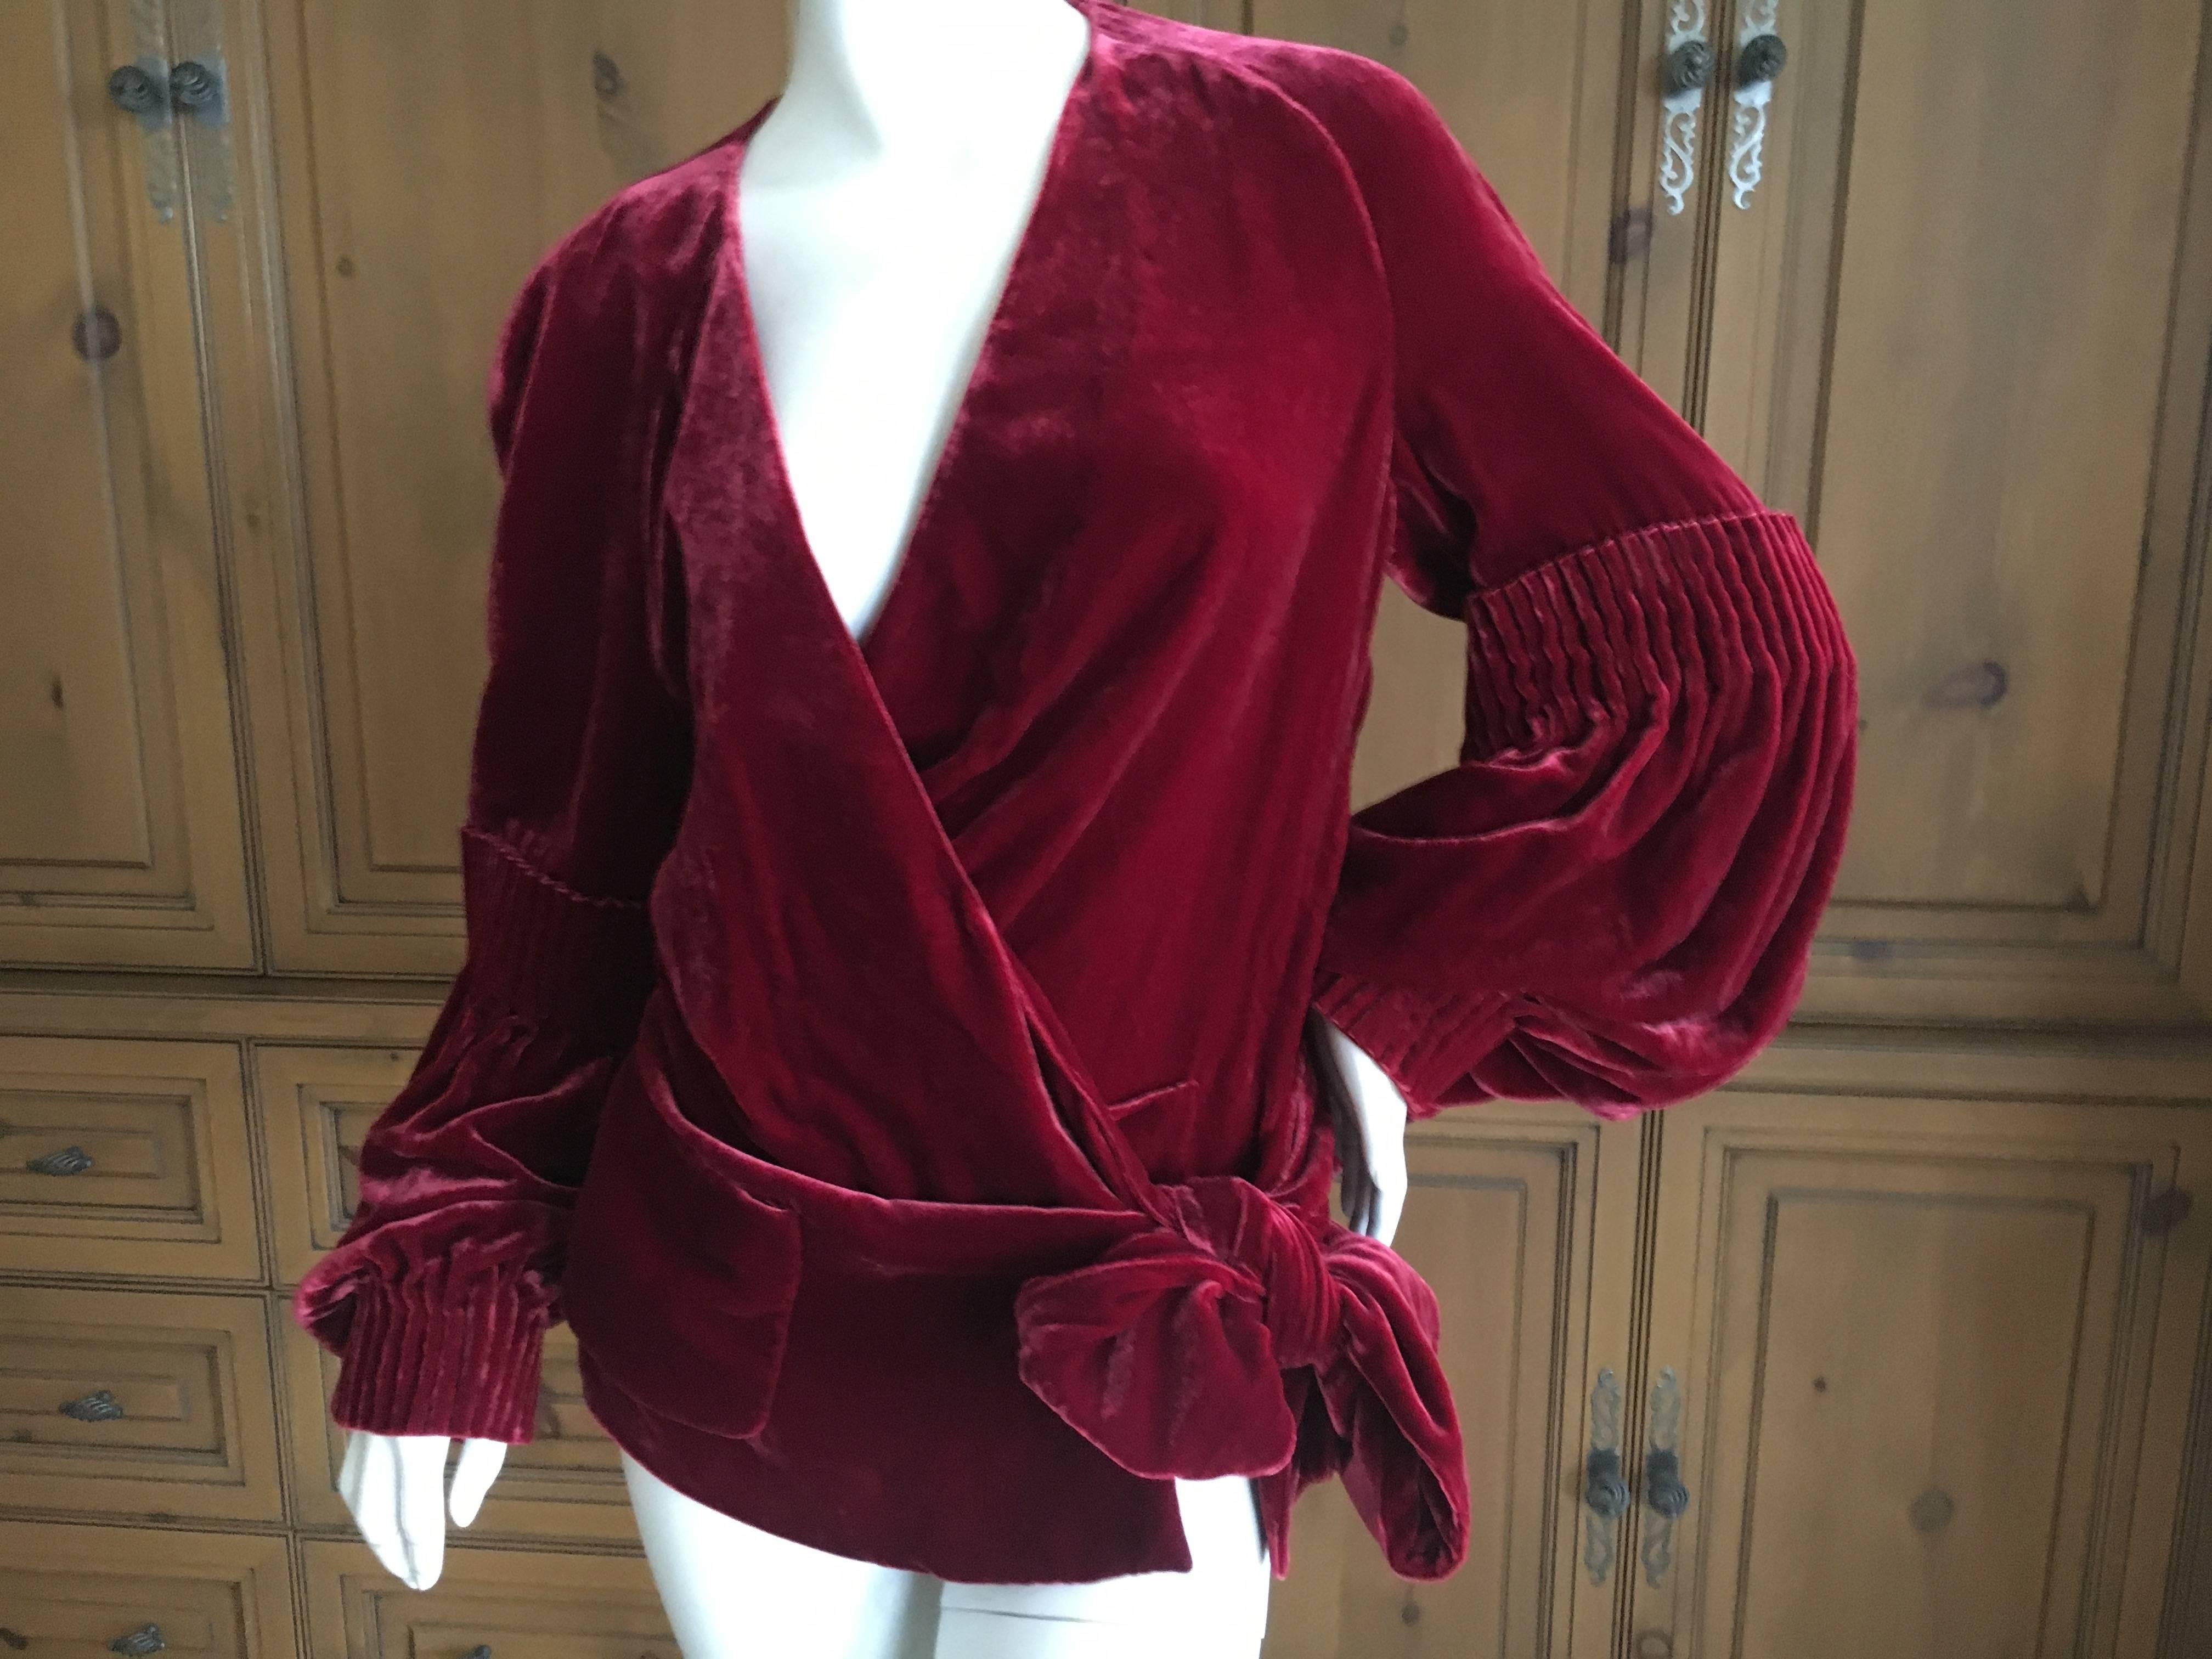 John Galliano Romantic Red Velvet Wrap Style Bishop Sleeve Top.
Hard to find size 46